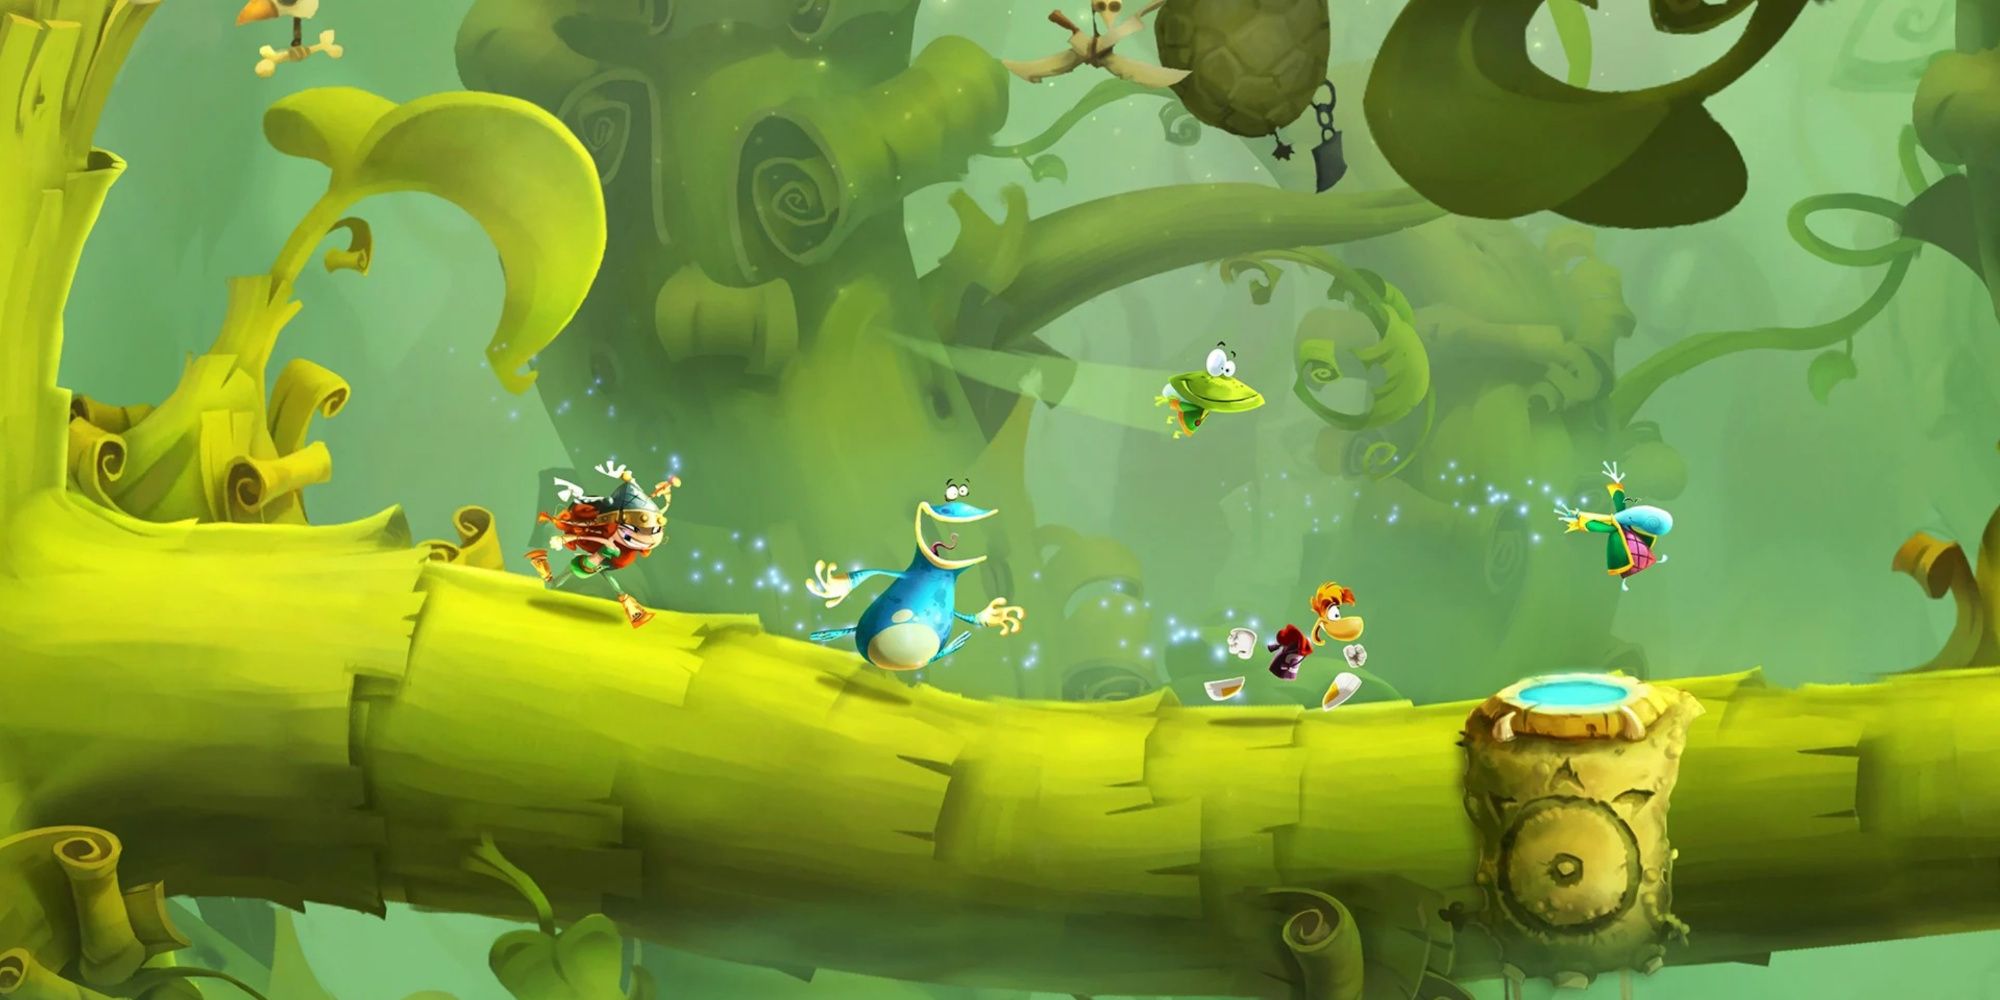 Exploring a level in Rayman Legends